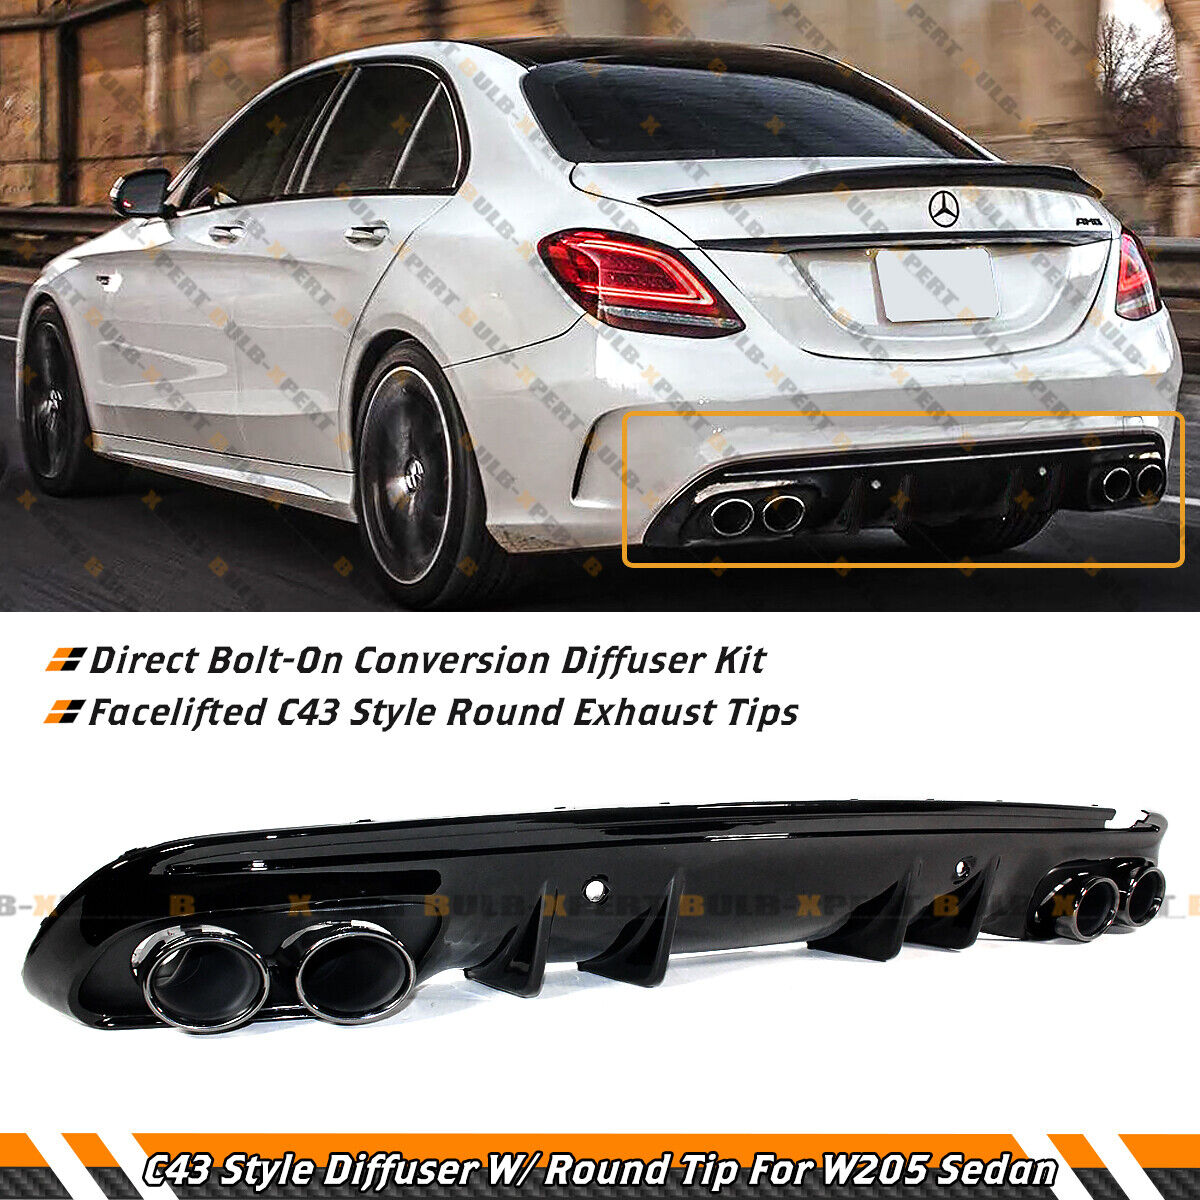 FOR 2015-21 W205 SEDAN C43 STYLE REAR DIFFUSER + ROUND BLACK CHROME EXHAUST TIPS